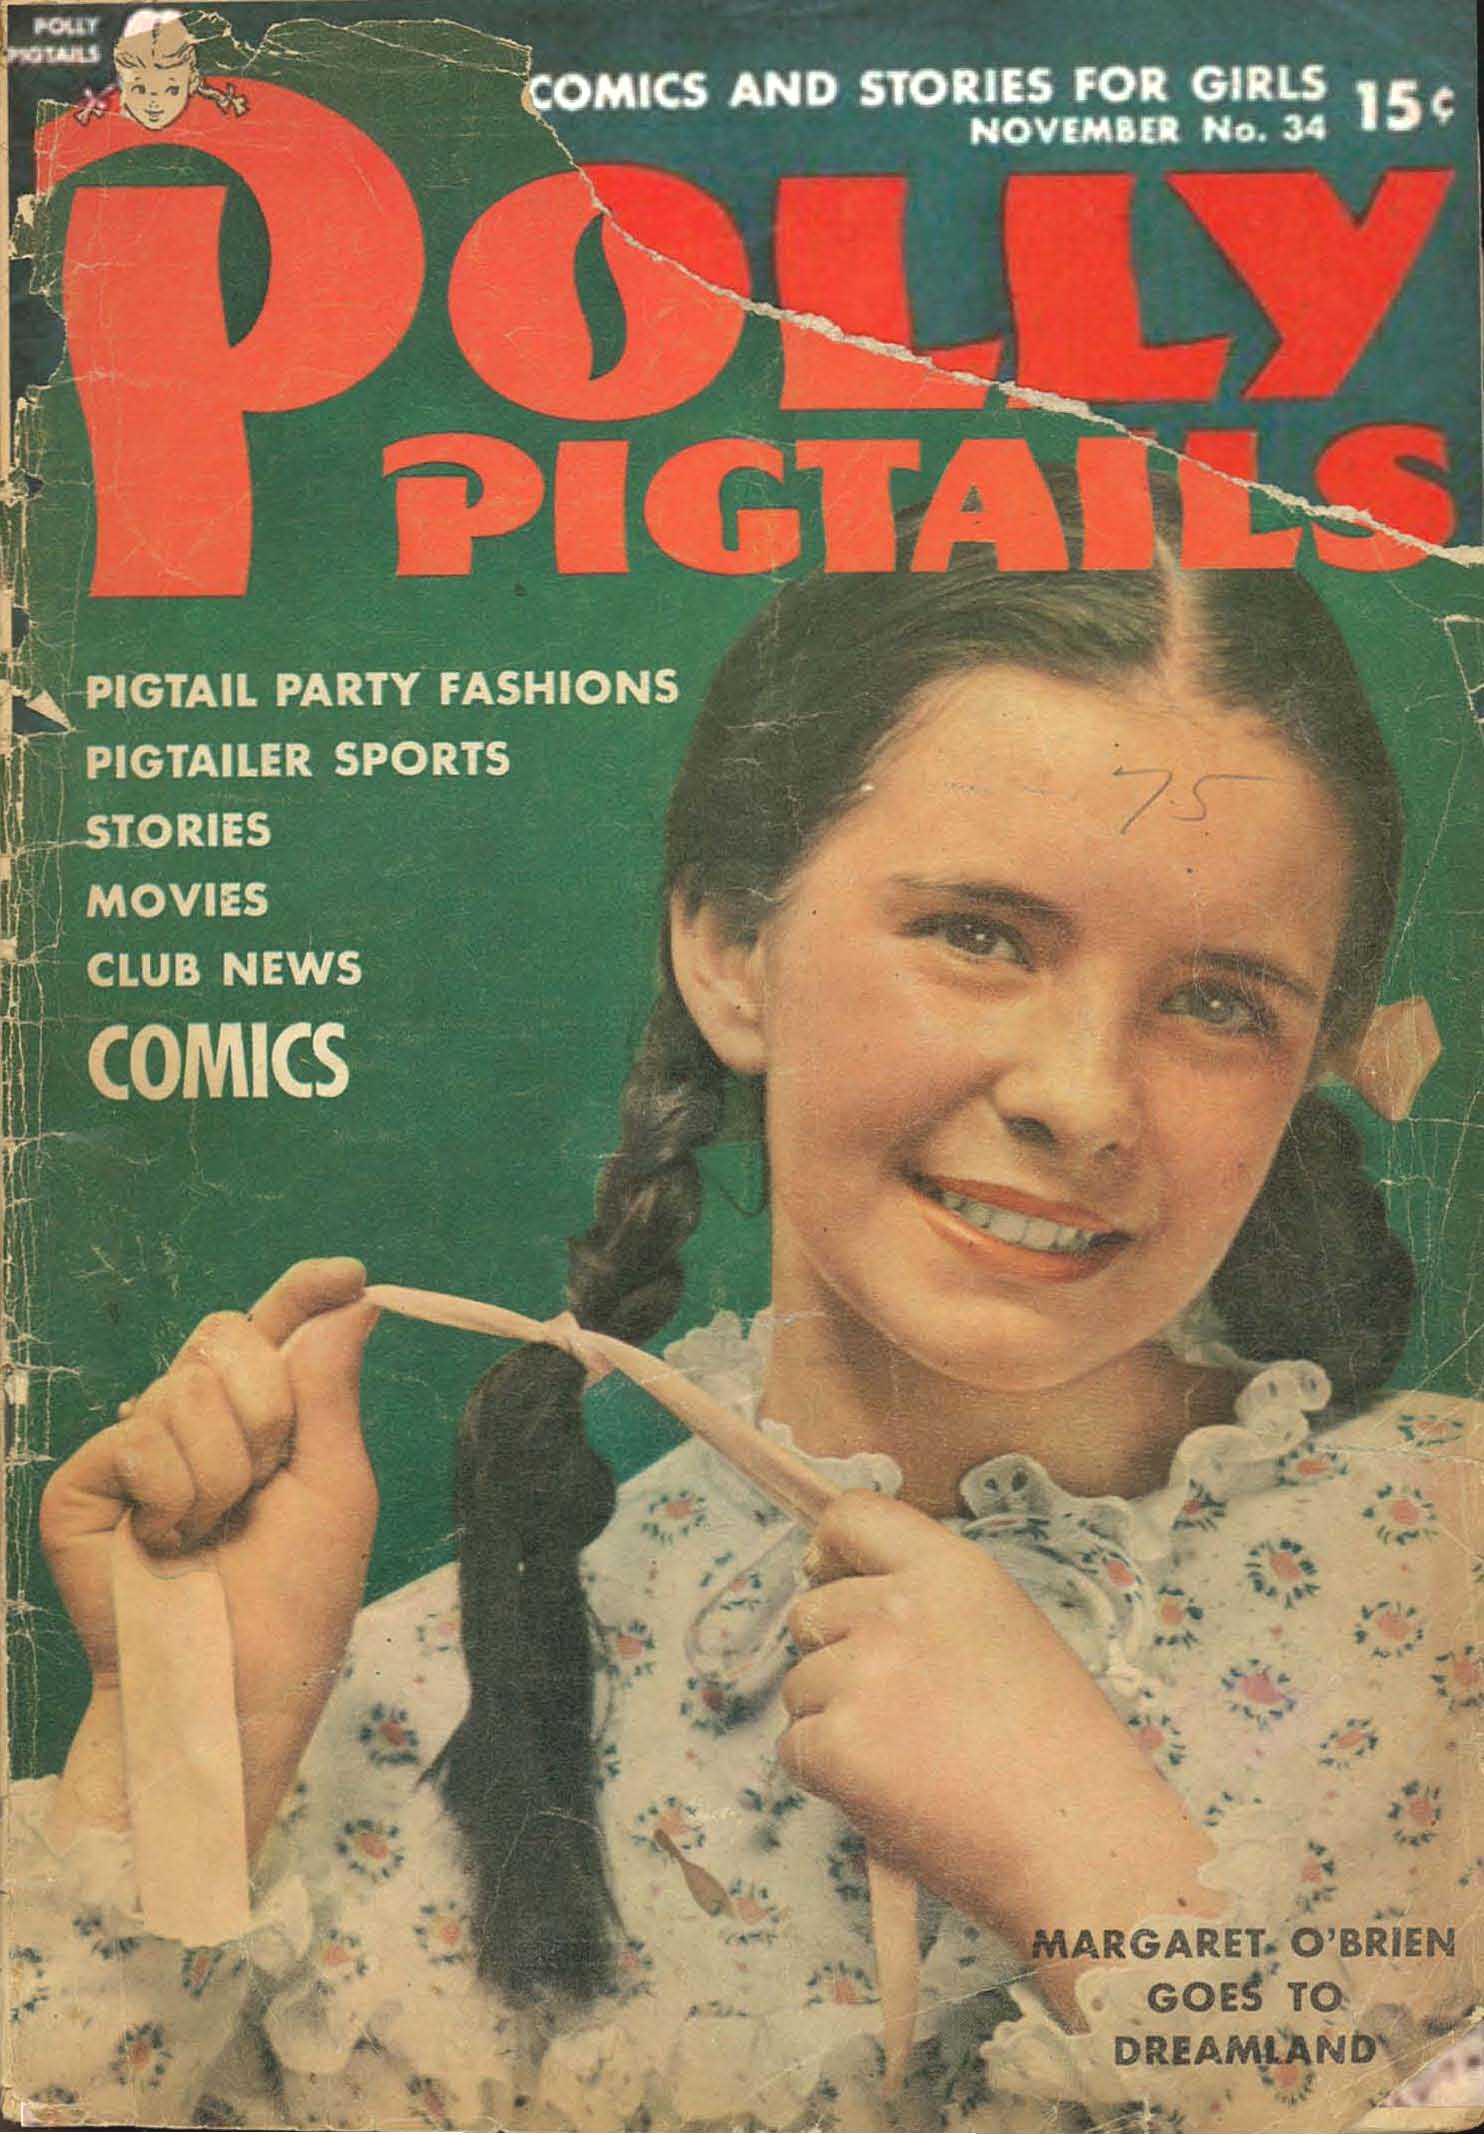 Book Cover For Polly Pigtails 34 - Version 2